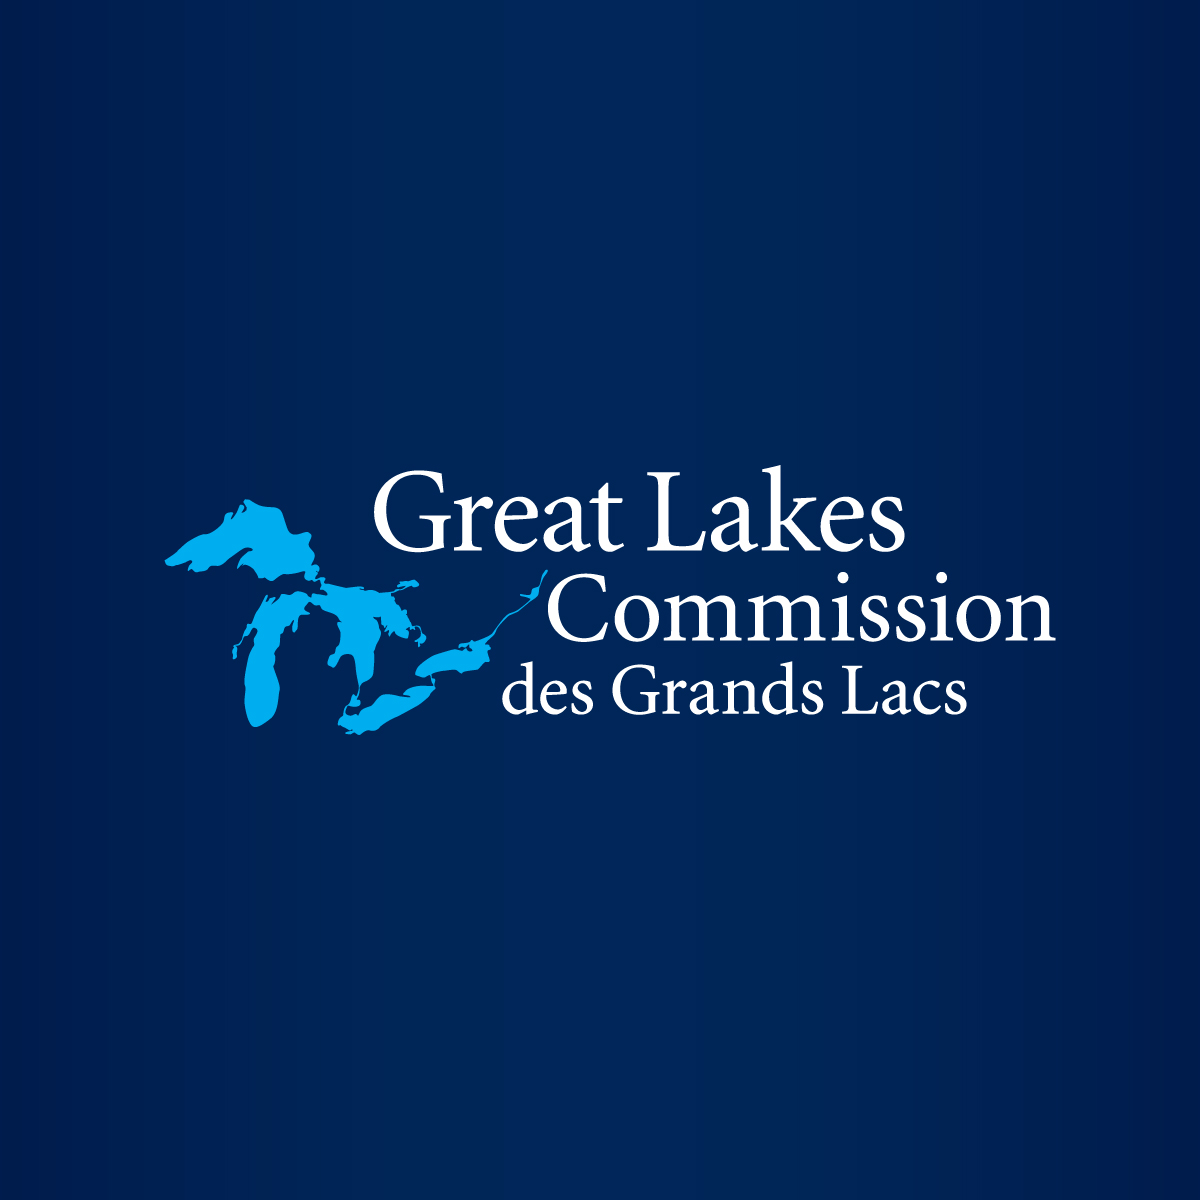 great lakes local action fund aims to improve health of lake huron